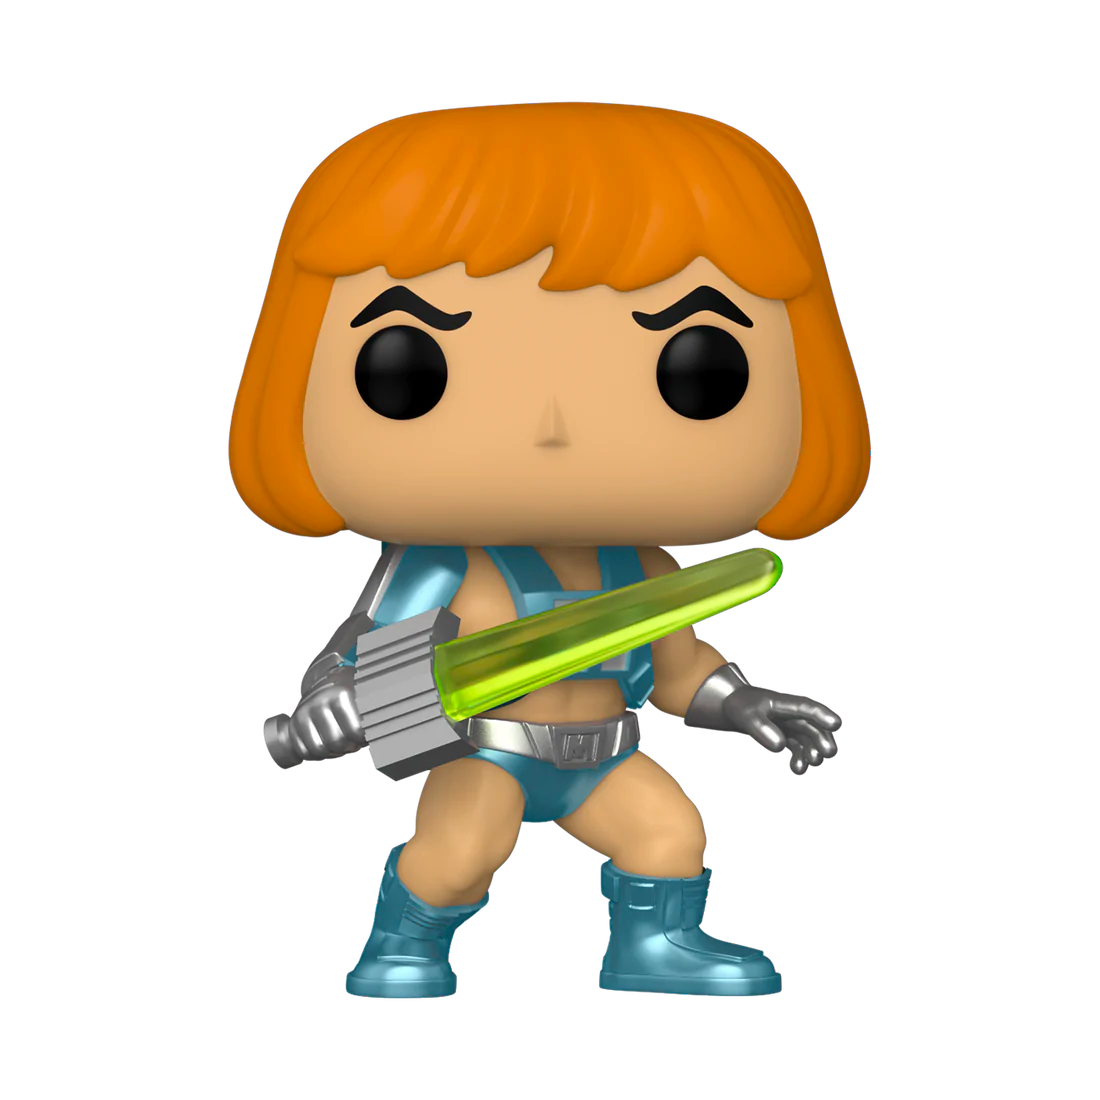 LASER POWER HE-MAN SAN DIEGO COMIC CON SDCC 2022 SUMMER CONVENTION EXCLUSIVE FUNKO POP MASTERS OF THE UNIVERSE #106 PRE ORDER